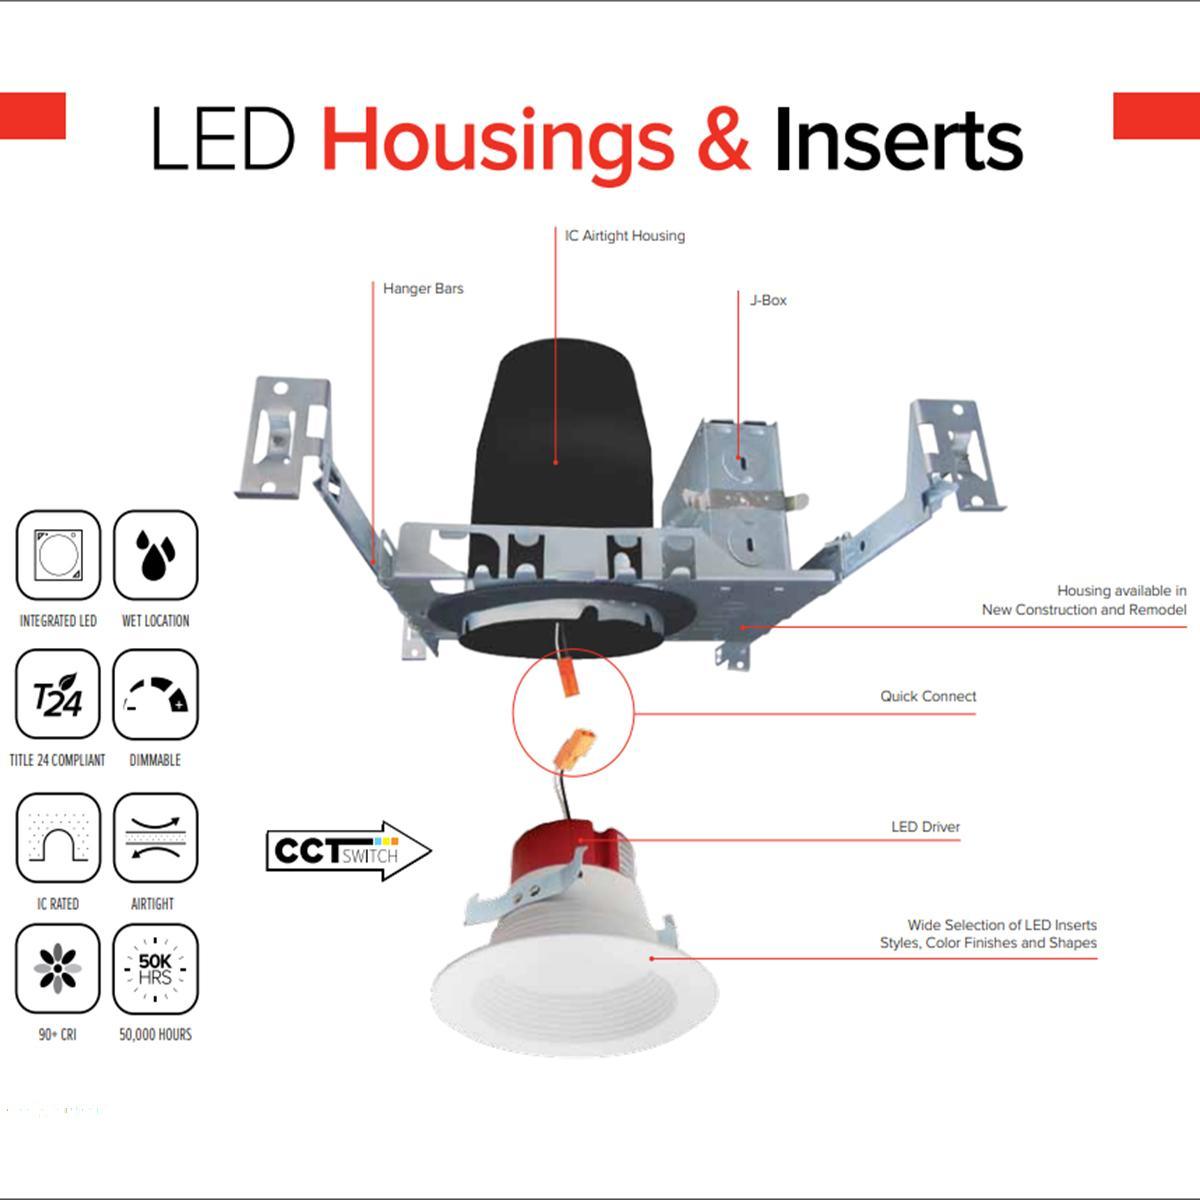 LED New Construction Housing, 4 in, IC Air-Tight, Quick Connect, 277V to 120V Step-Down Transformer